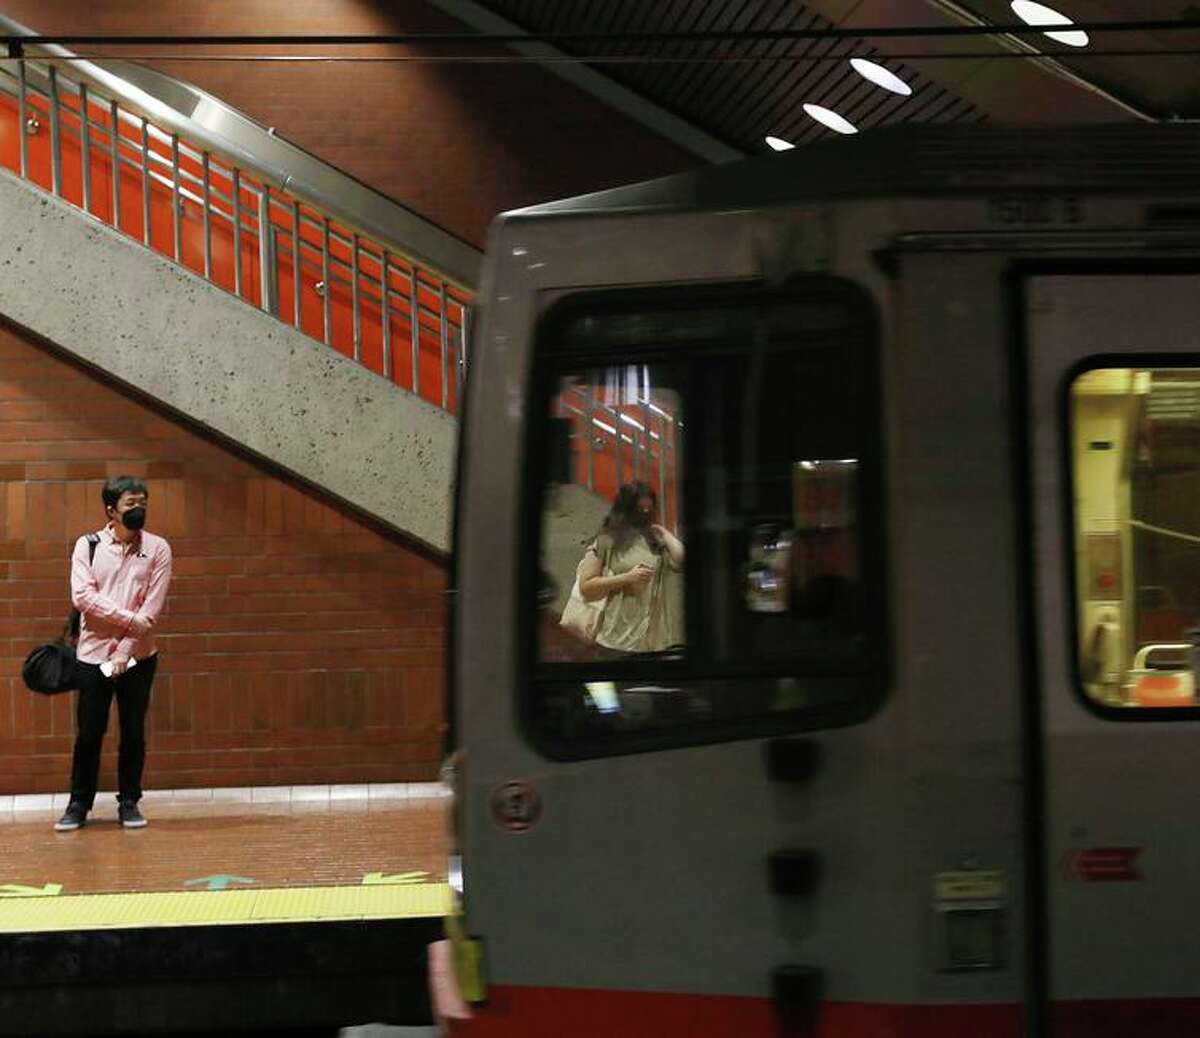 People wait on the platform as a MUNI train arrives at Castro Street Station in San Francisco.